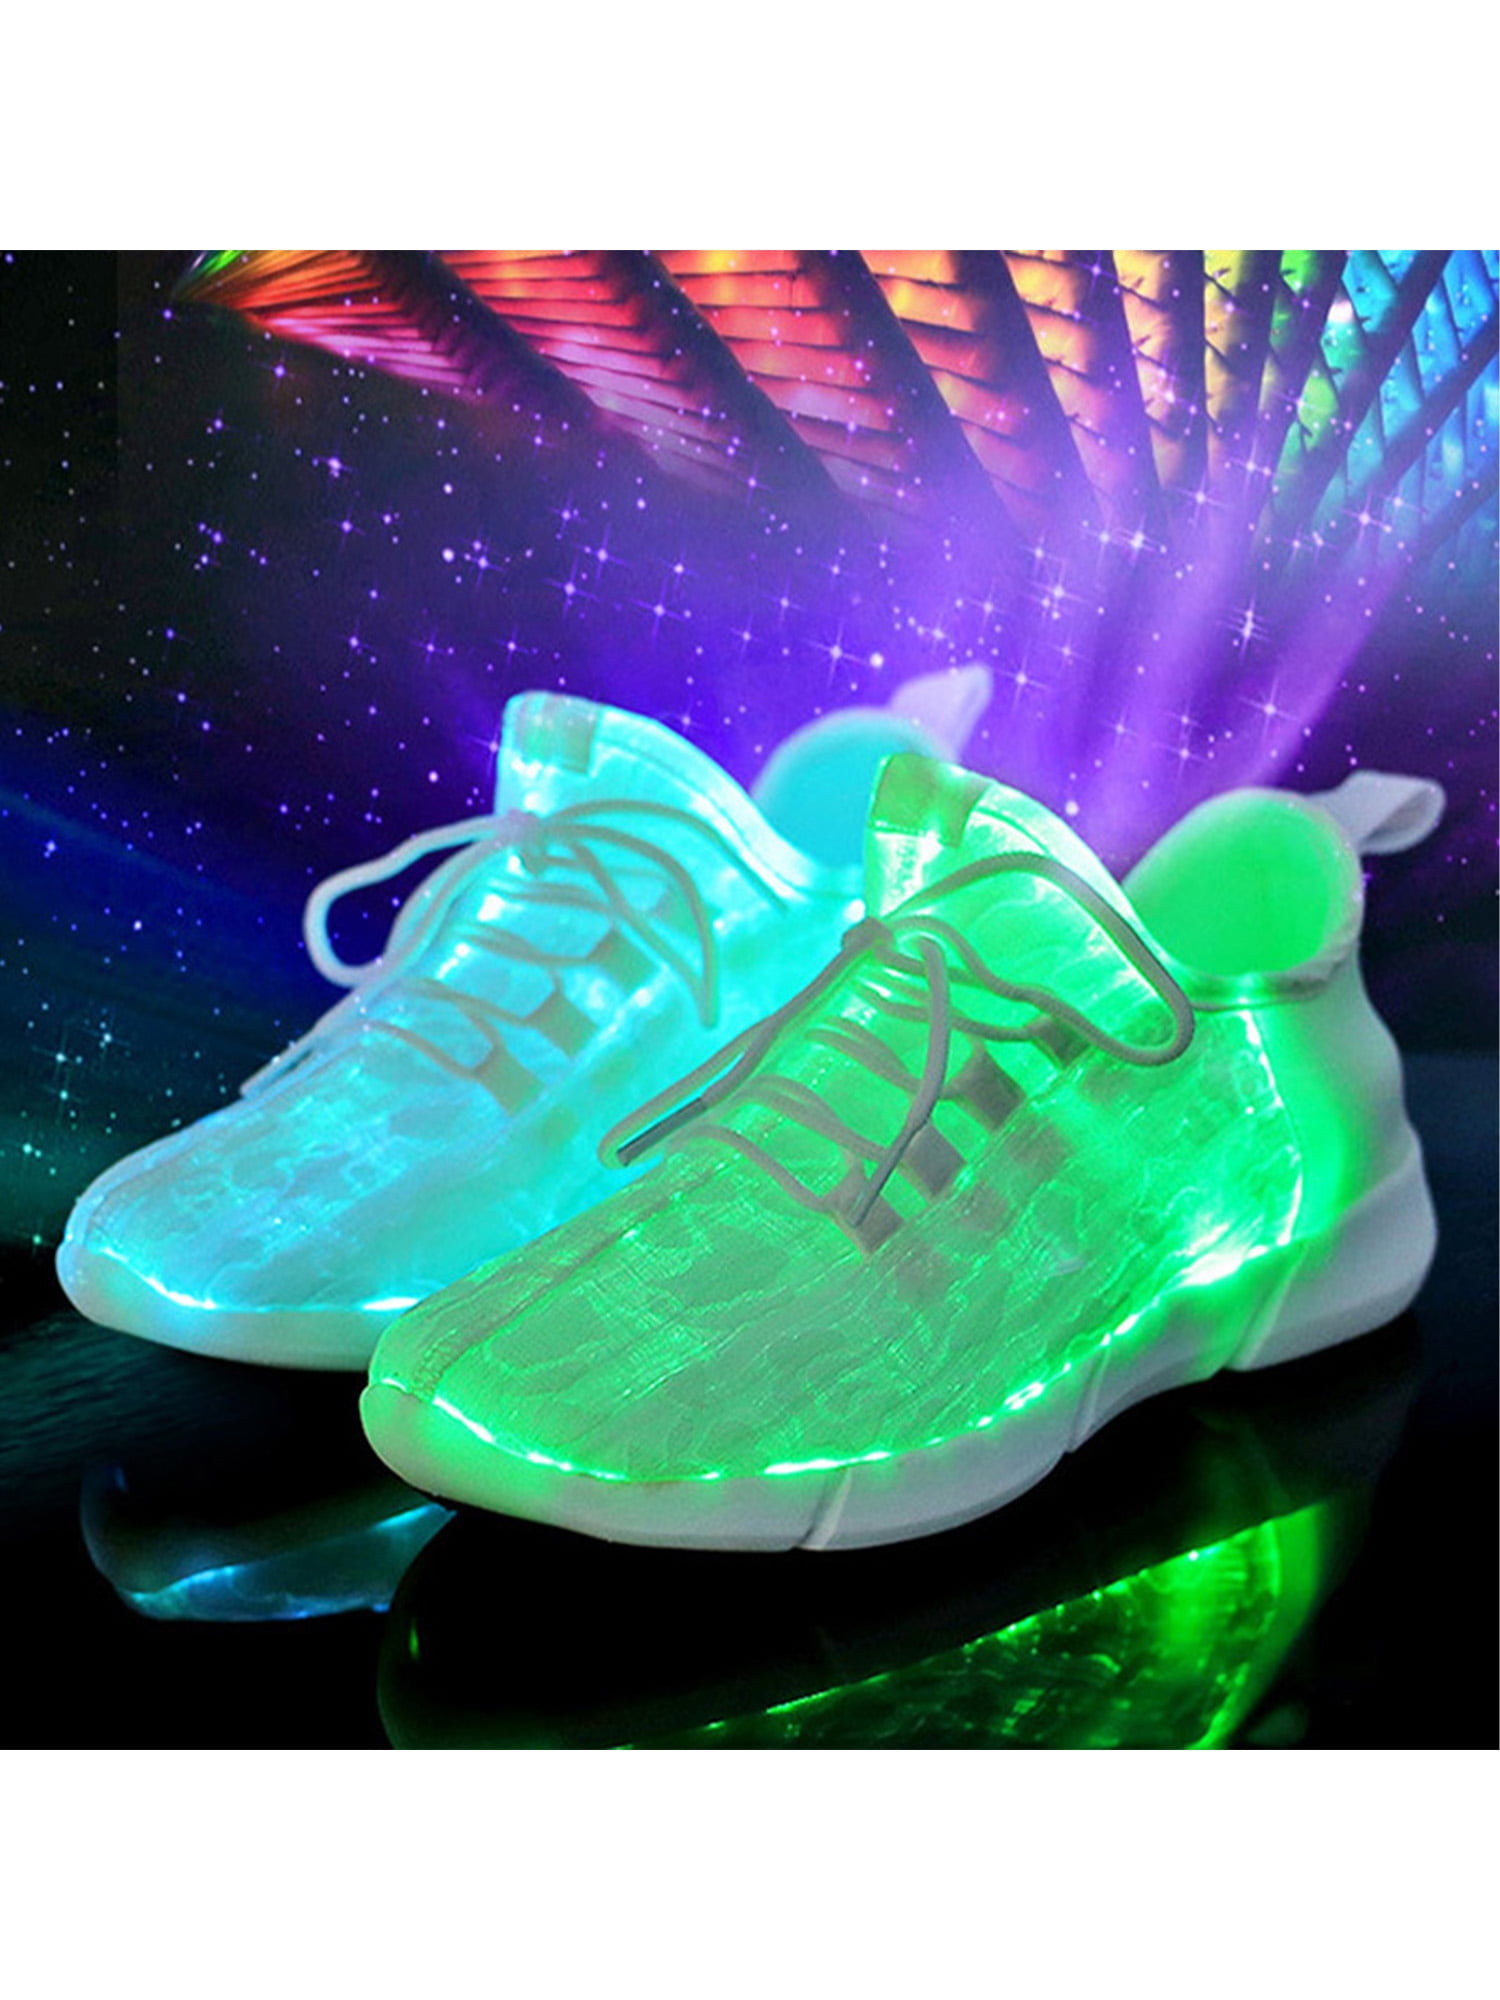 LUXUR LED Shoes Light Up Sneakers for Women Men Kids with USB Charging  Flash - Walmart.com